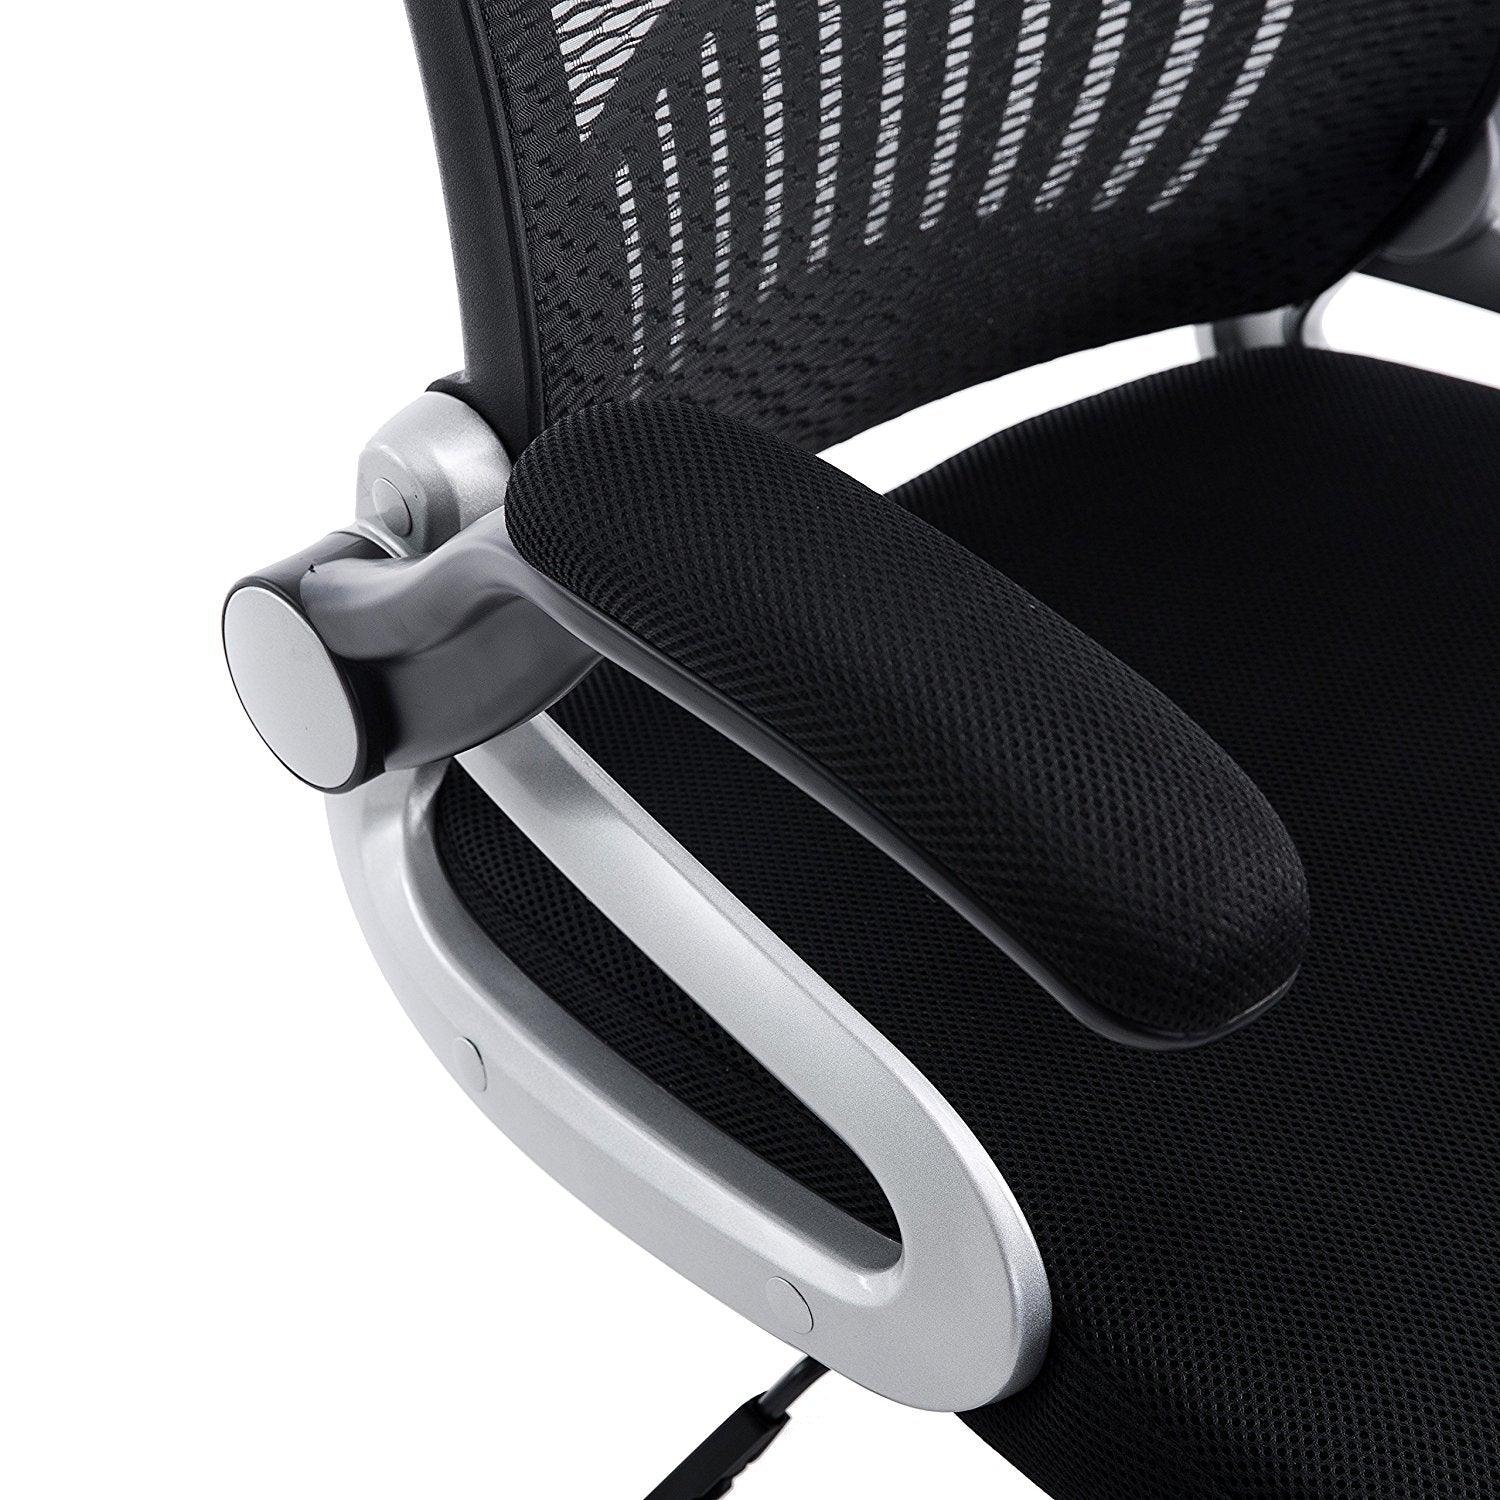 Mesh High Back Extra Padded Swivel Office Chair with Head Support & Adjustable Arms, Black